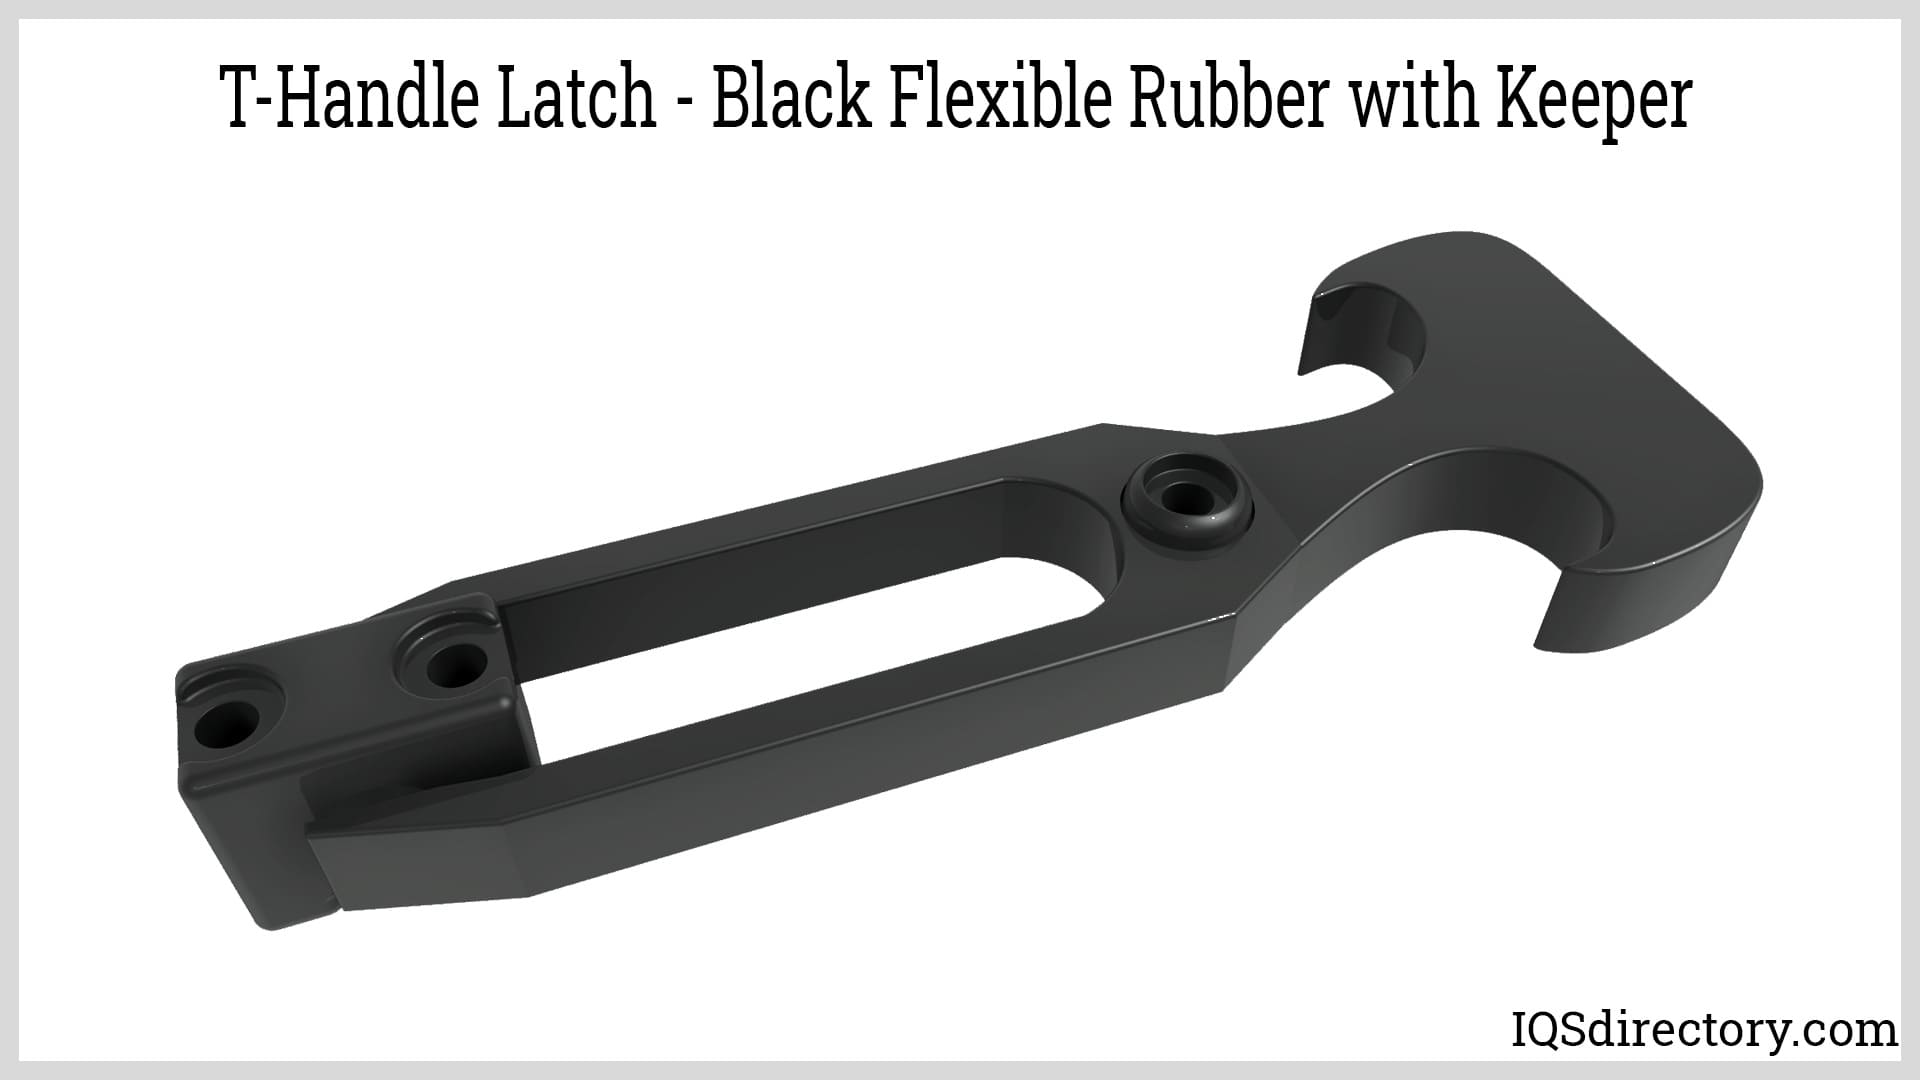 T-Handle Latch - Black Flexible Rubber with Keeper